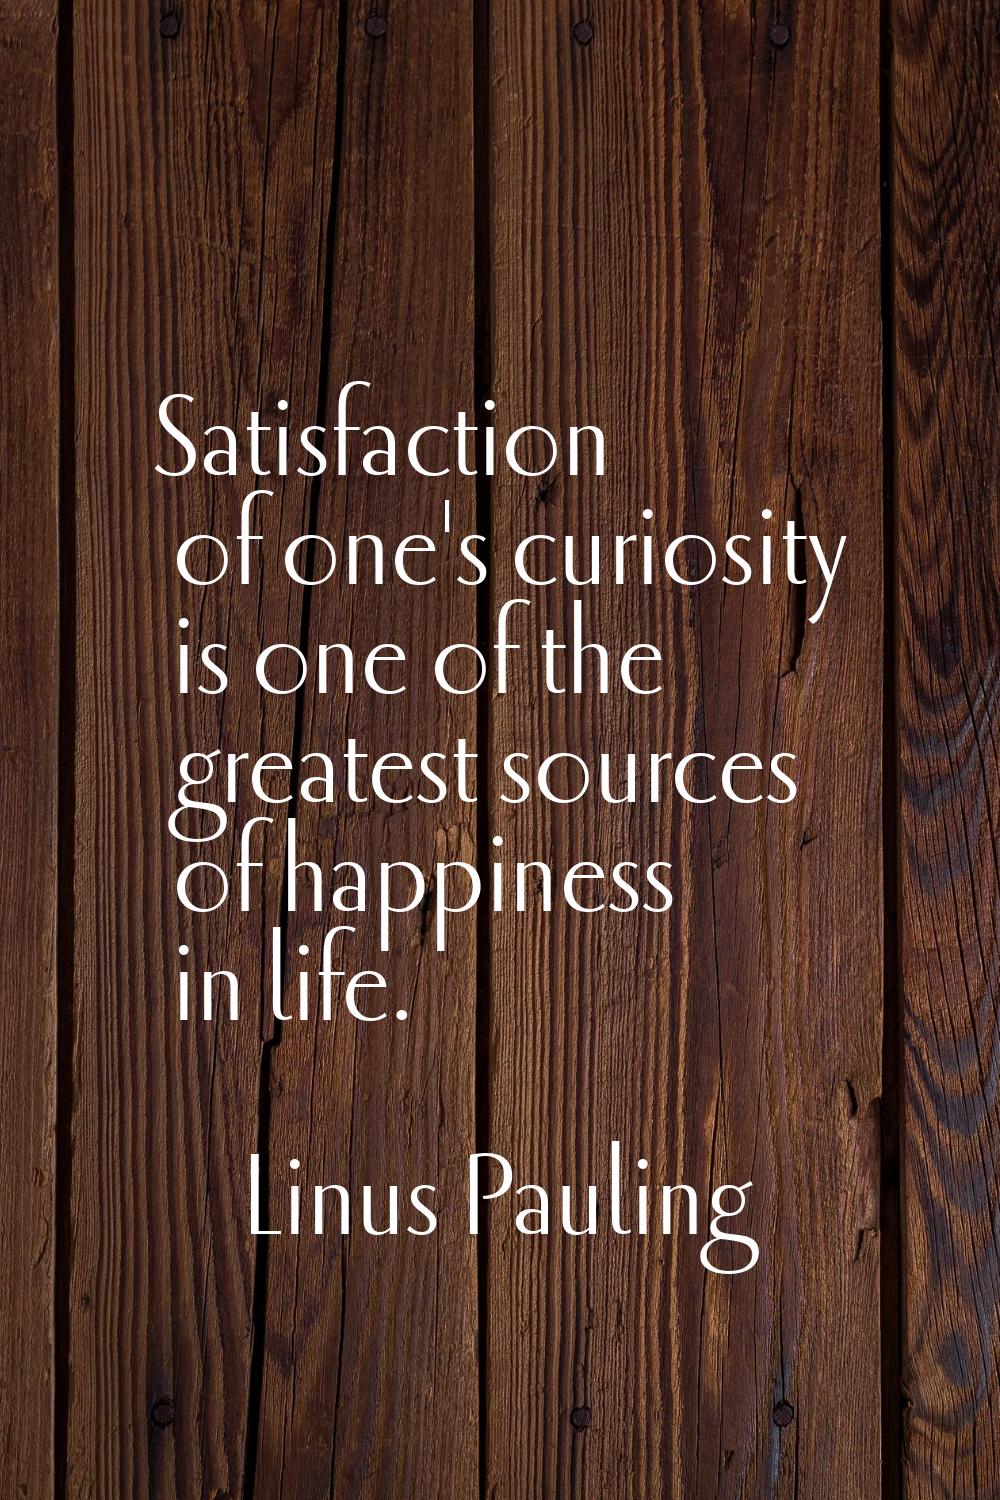 Satisfaction of one's curiosity is one of the greatest sources of happiness in life.